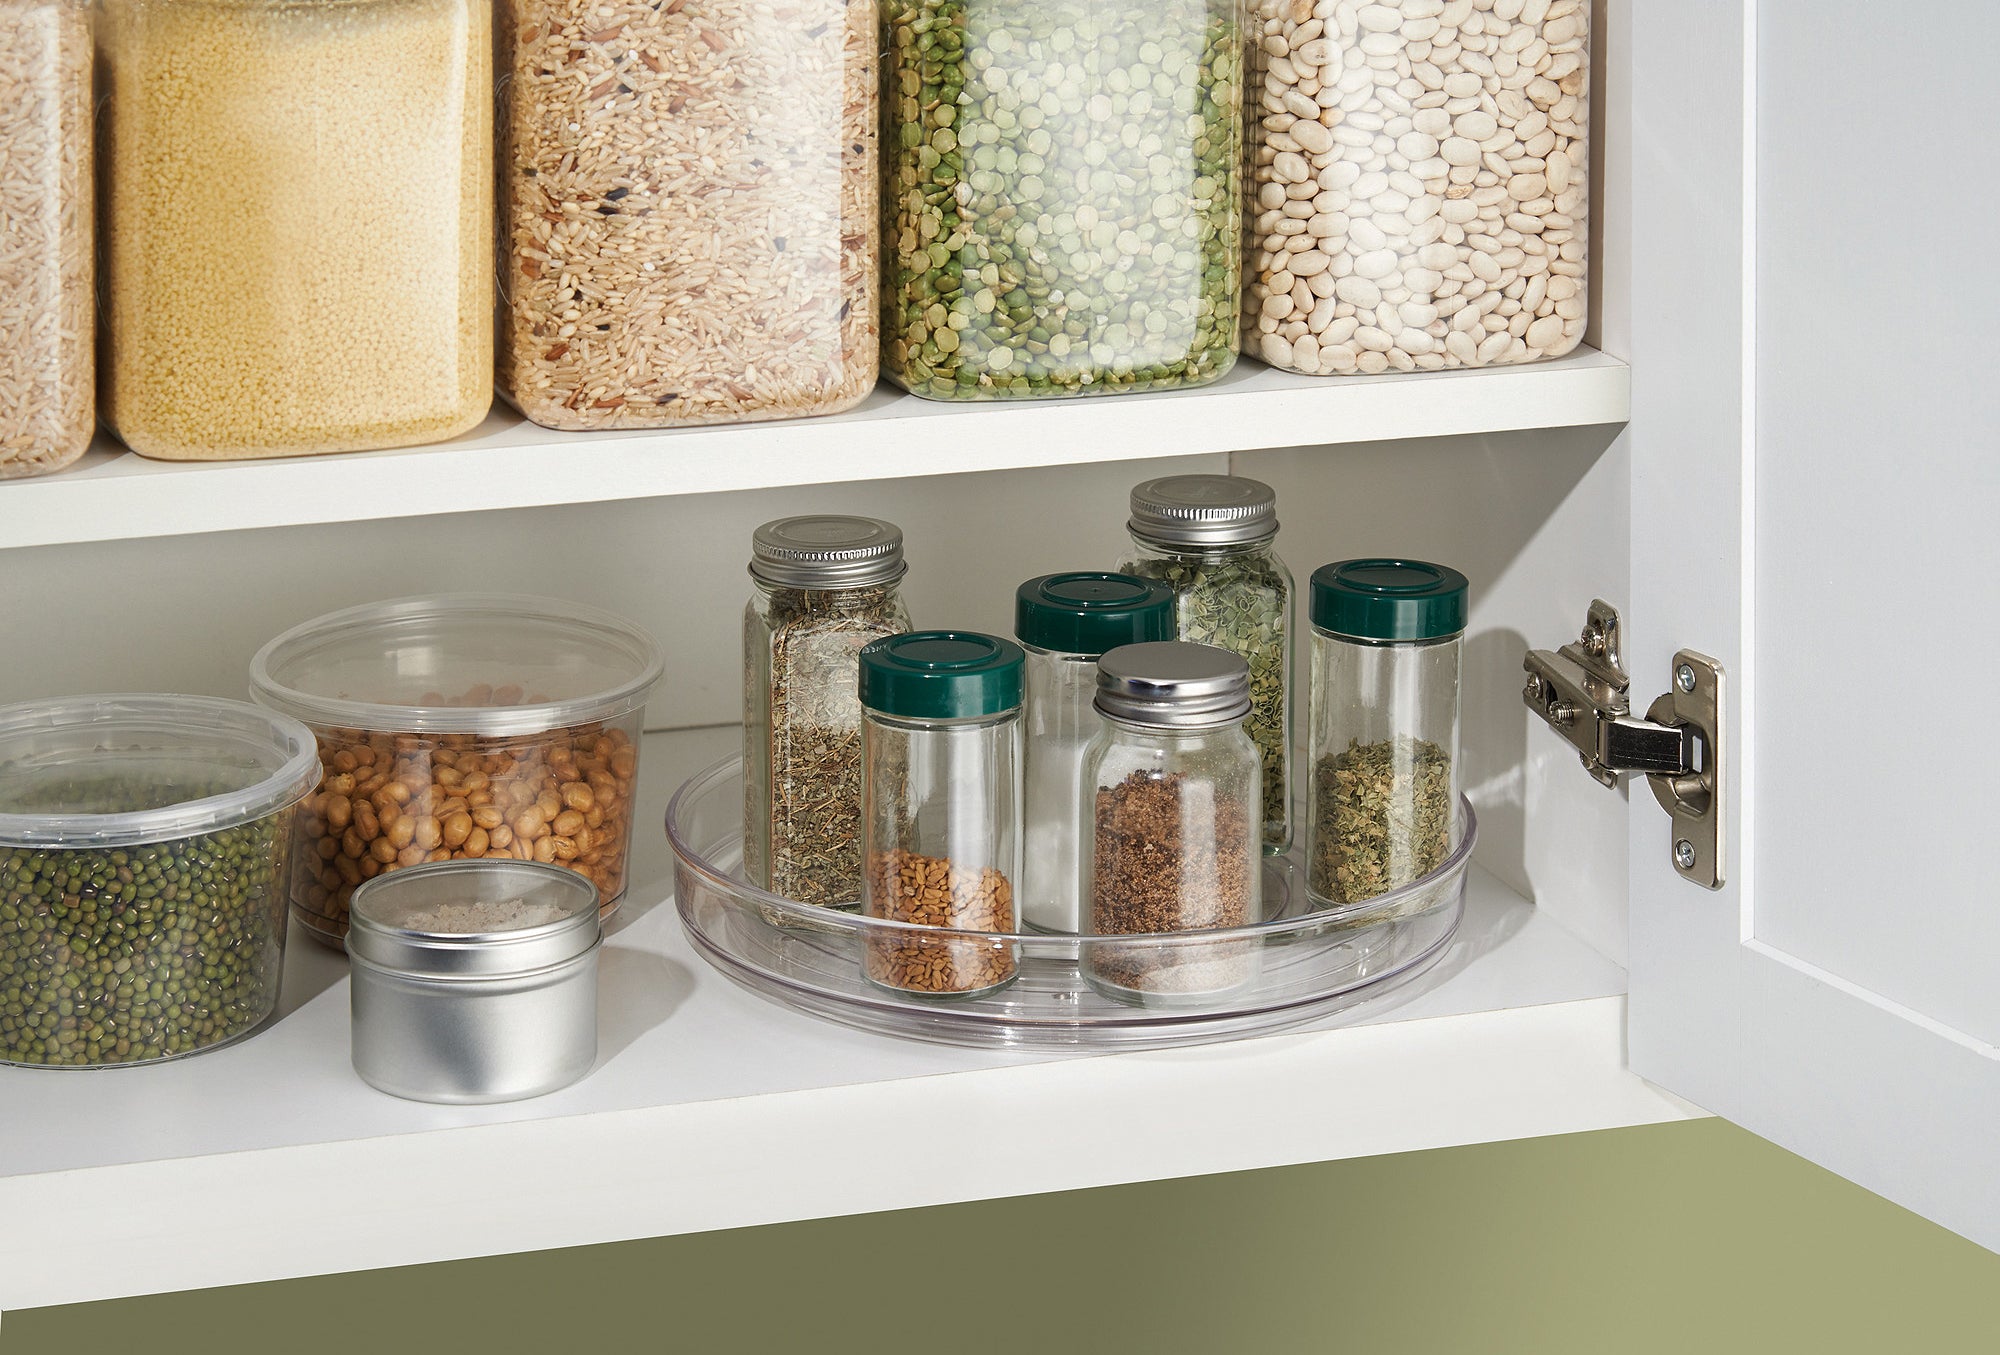 clear turnable holding spice jars on the bottom shelf of a cabinet